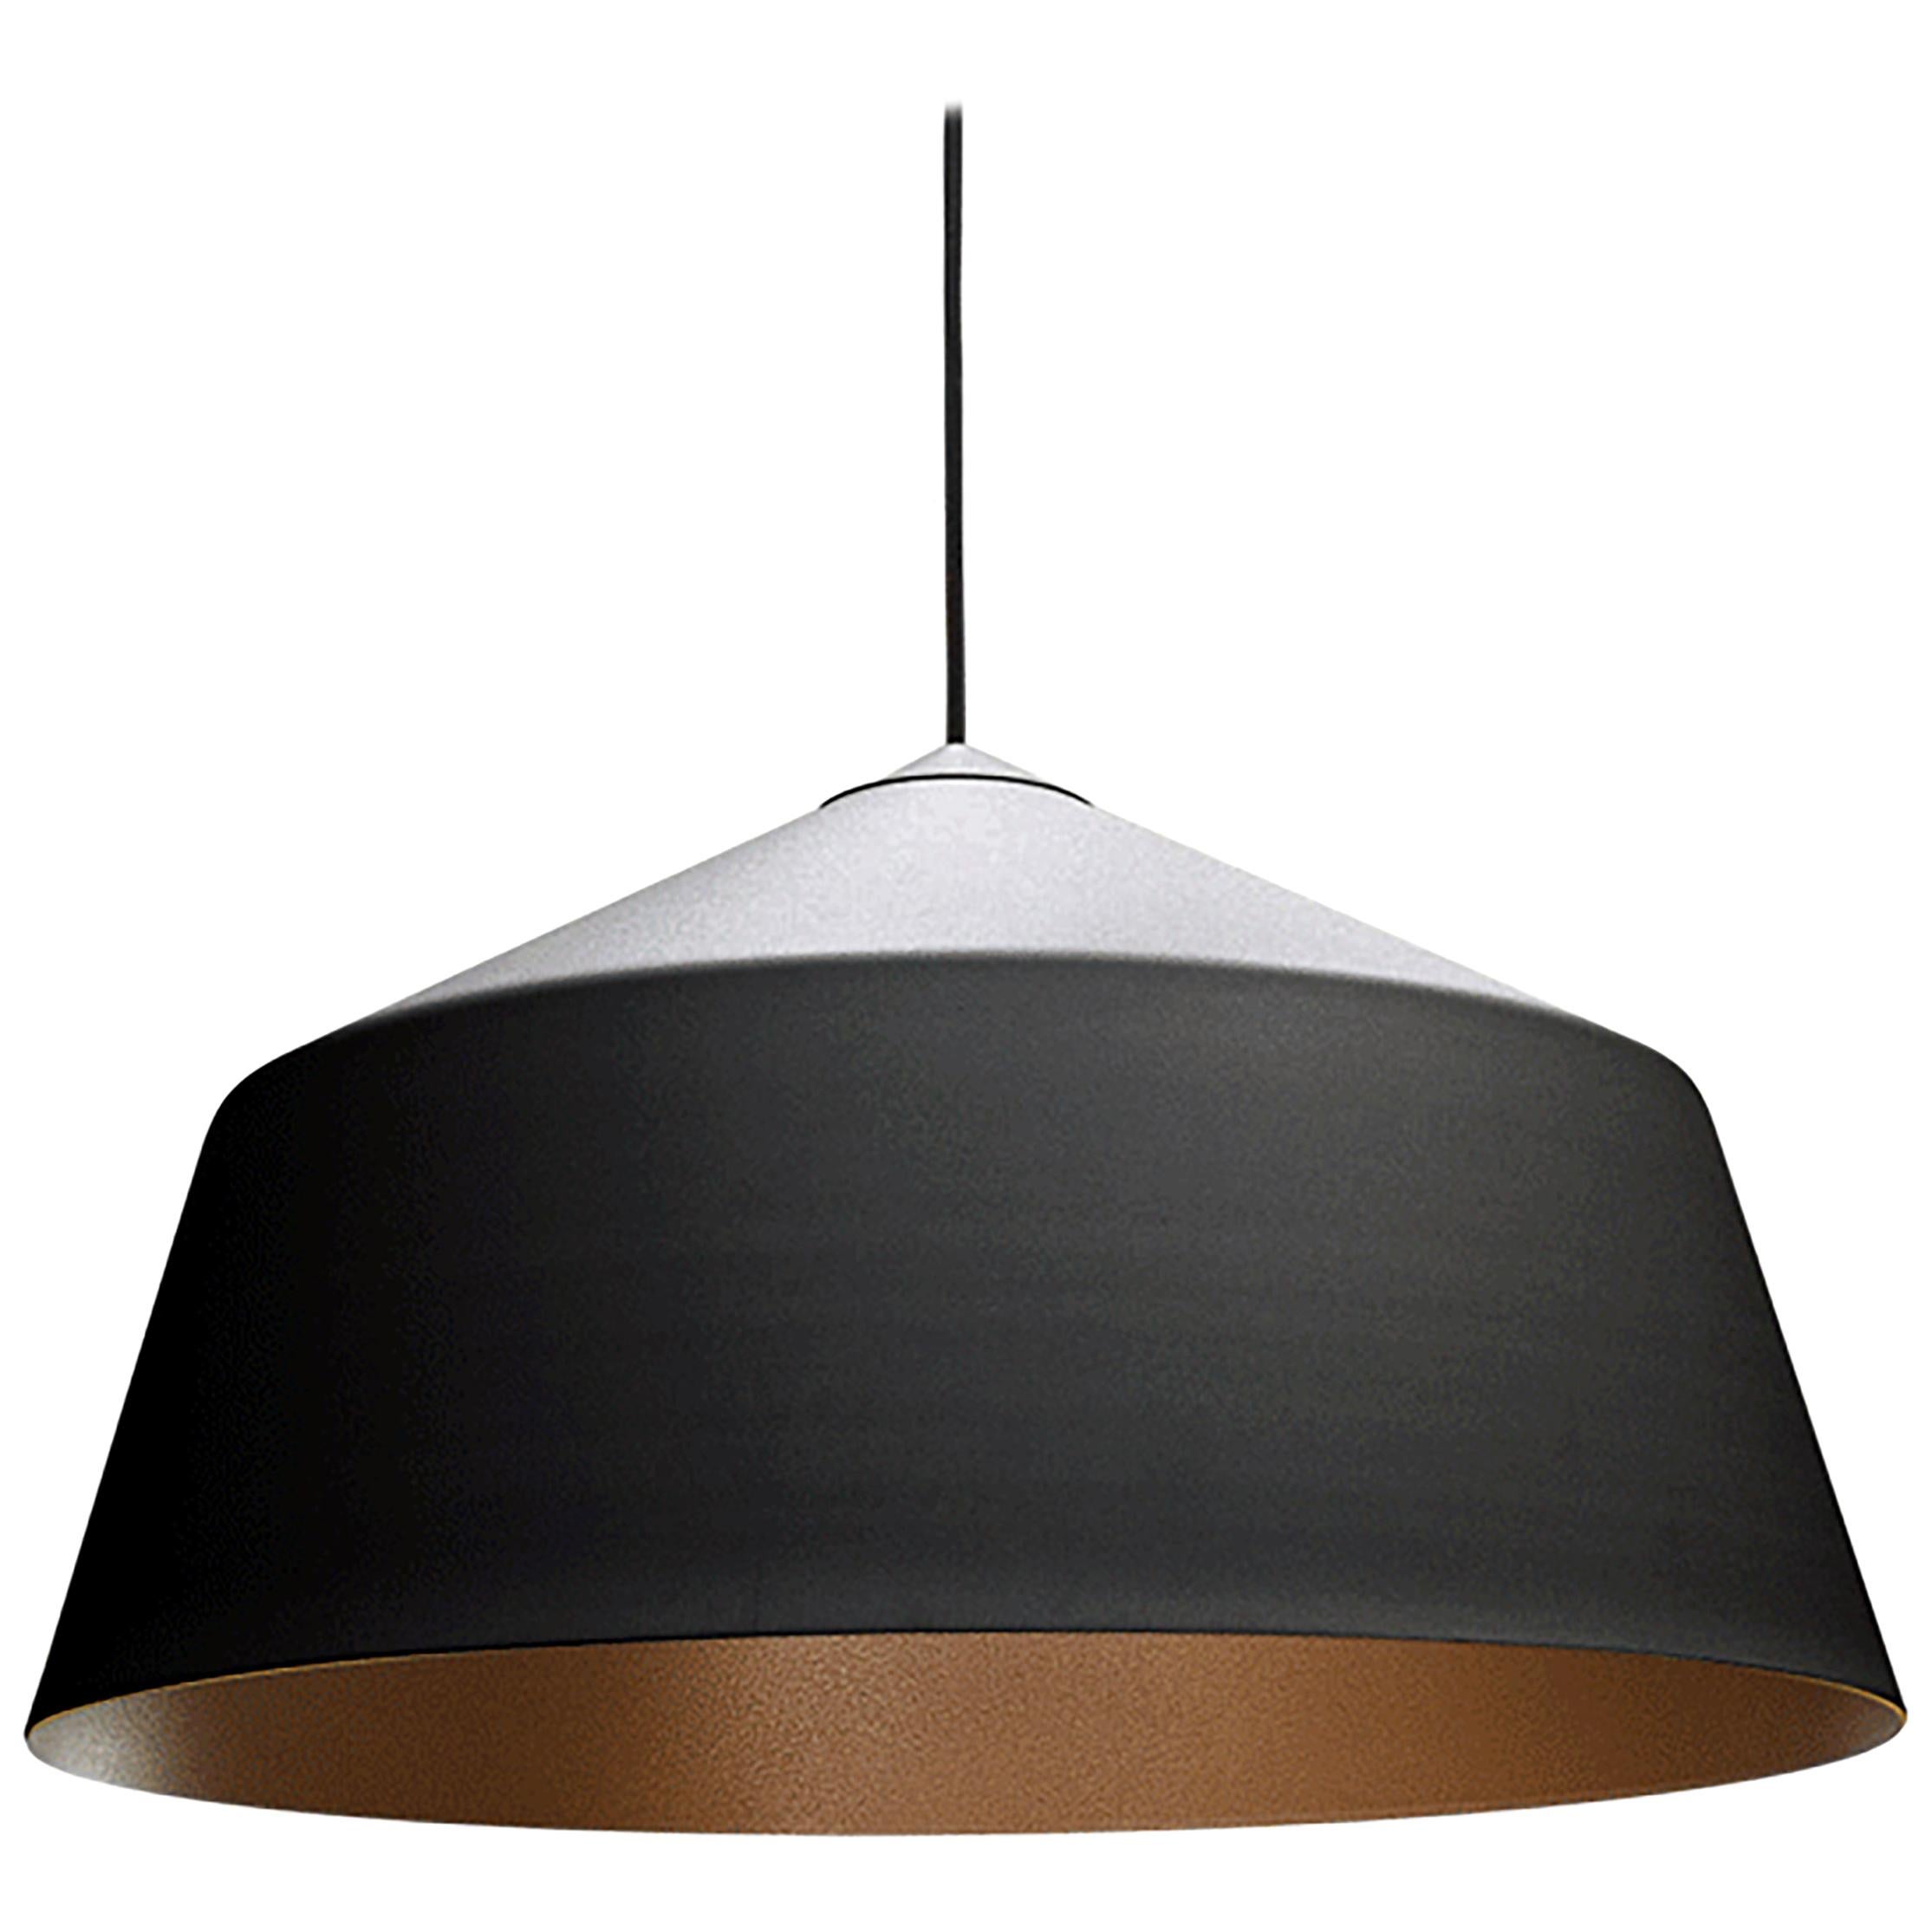 Circus Pendant Light Design By Corinna Warm For Warm Large Black/Bronze In Stock For Sale